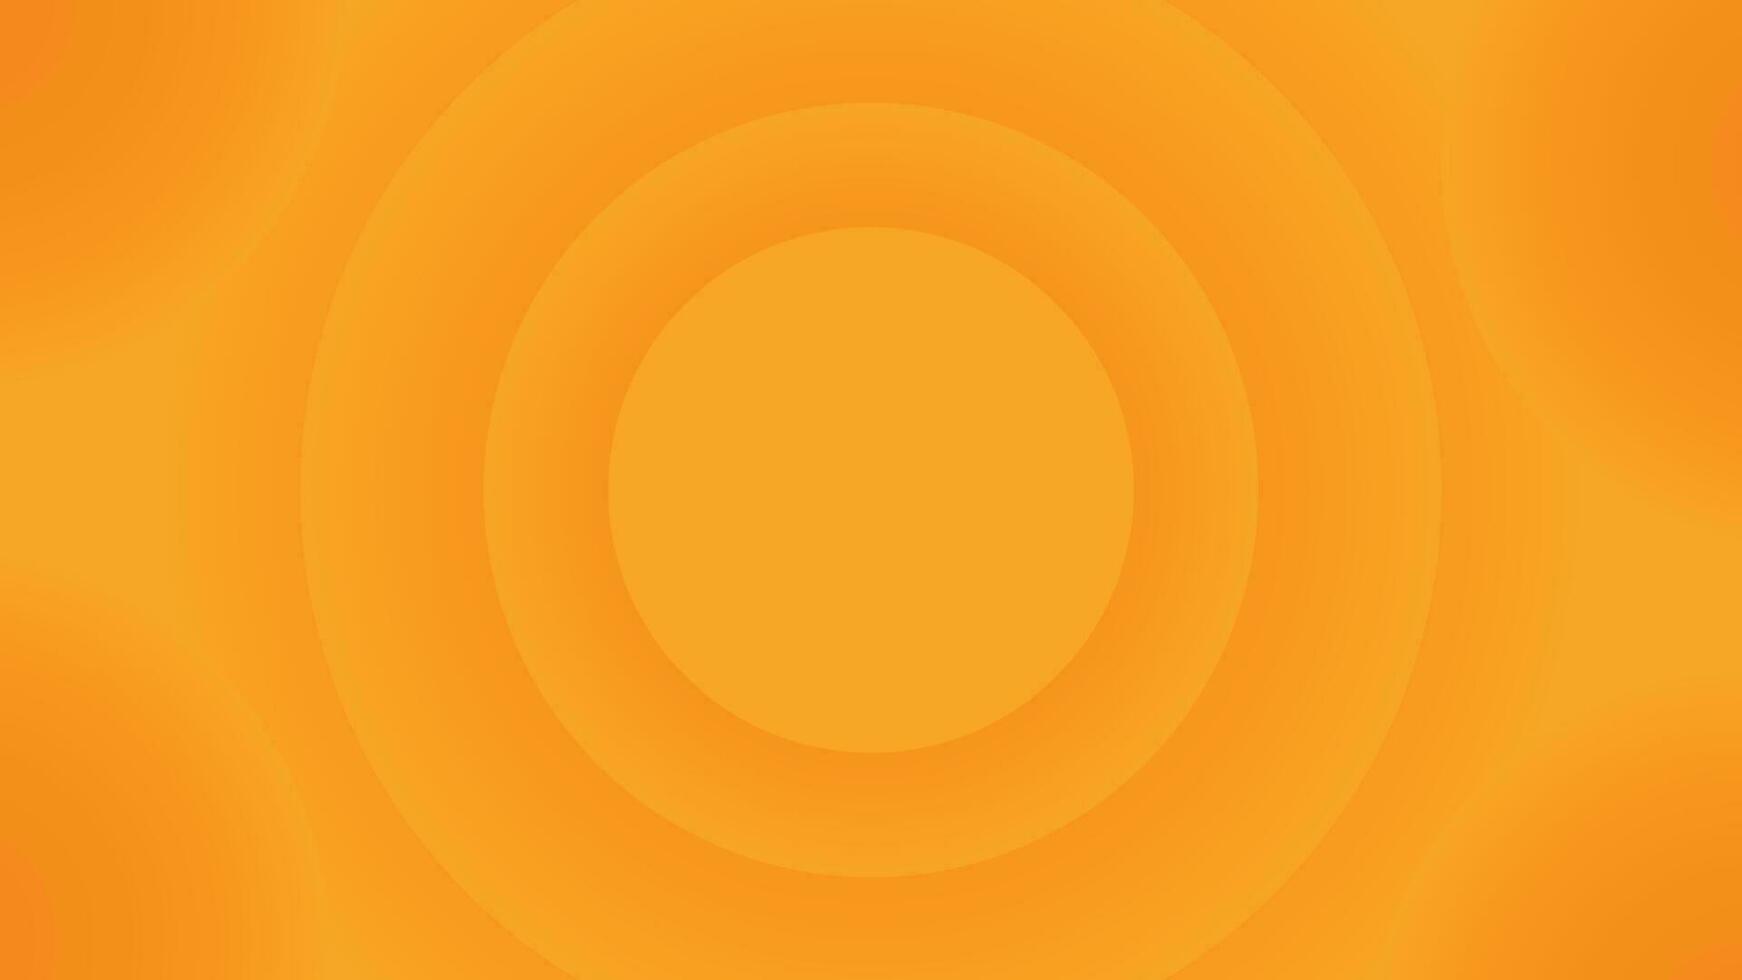 Orange Background with Concentric Circles vector